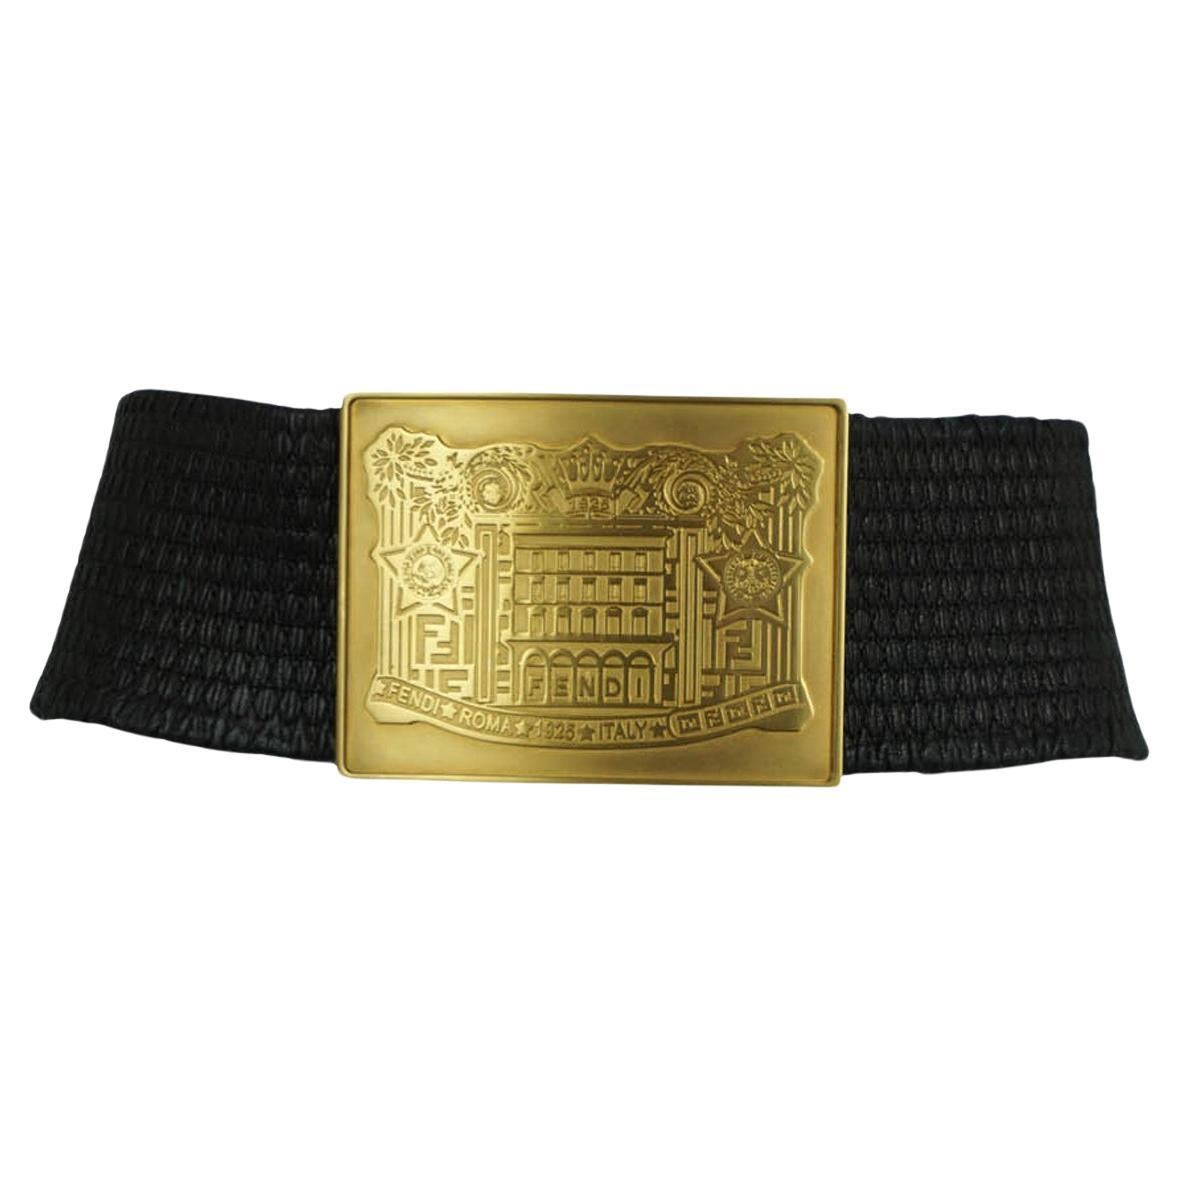 Do Fendi belts have serial numbers?